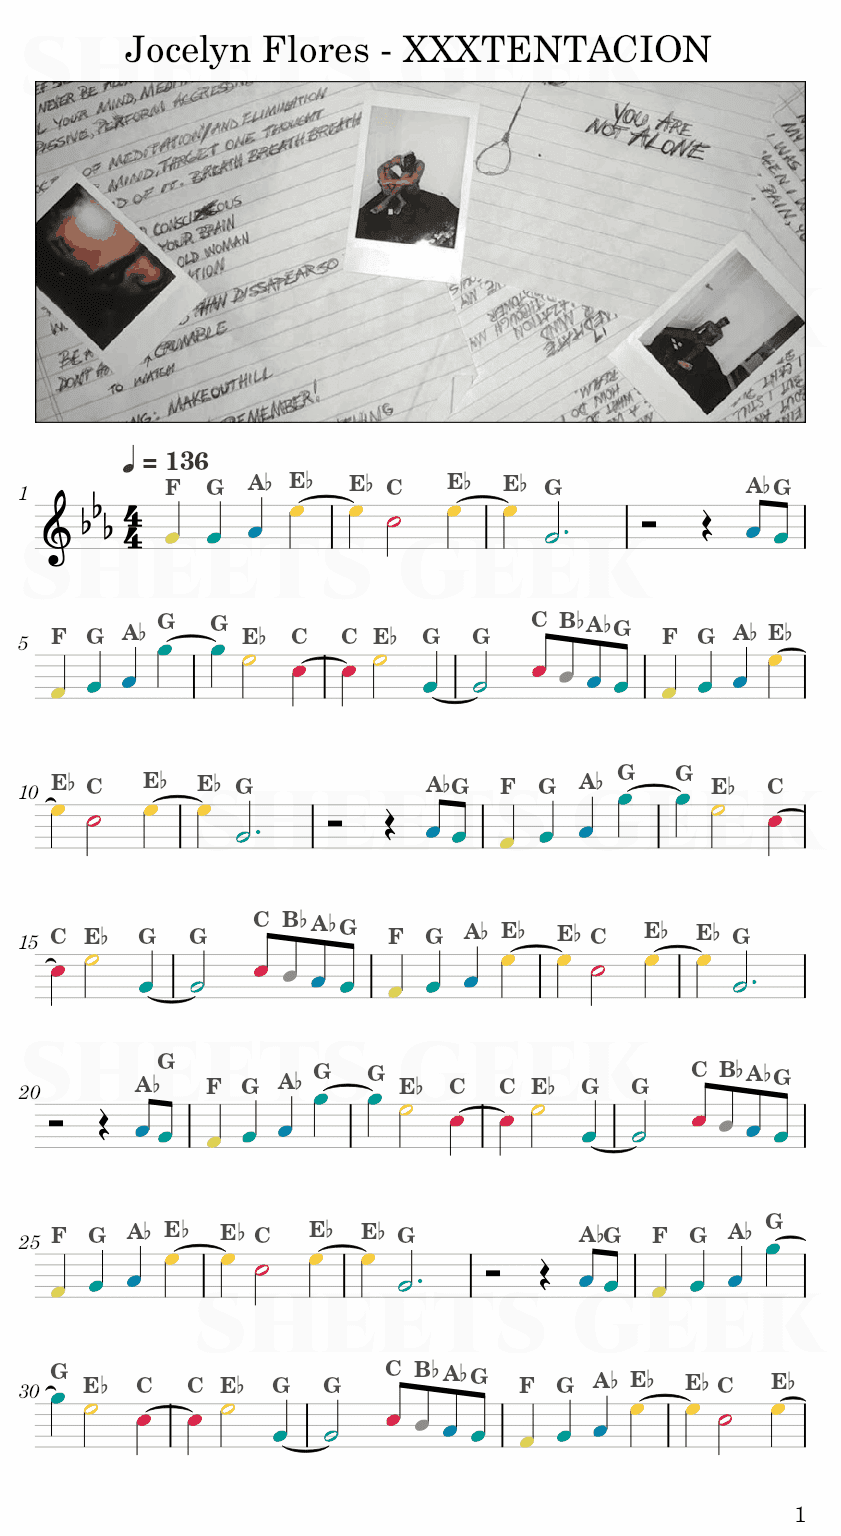 Jocelyn Flores - XXXTENTACION Easy Sheet Music Free for piano, keyboard, flute, violin, sax, cello page 1